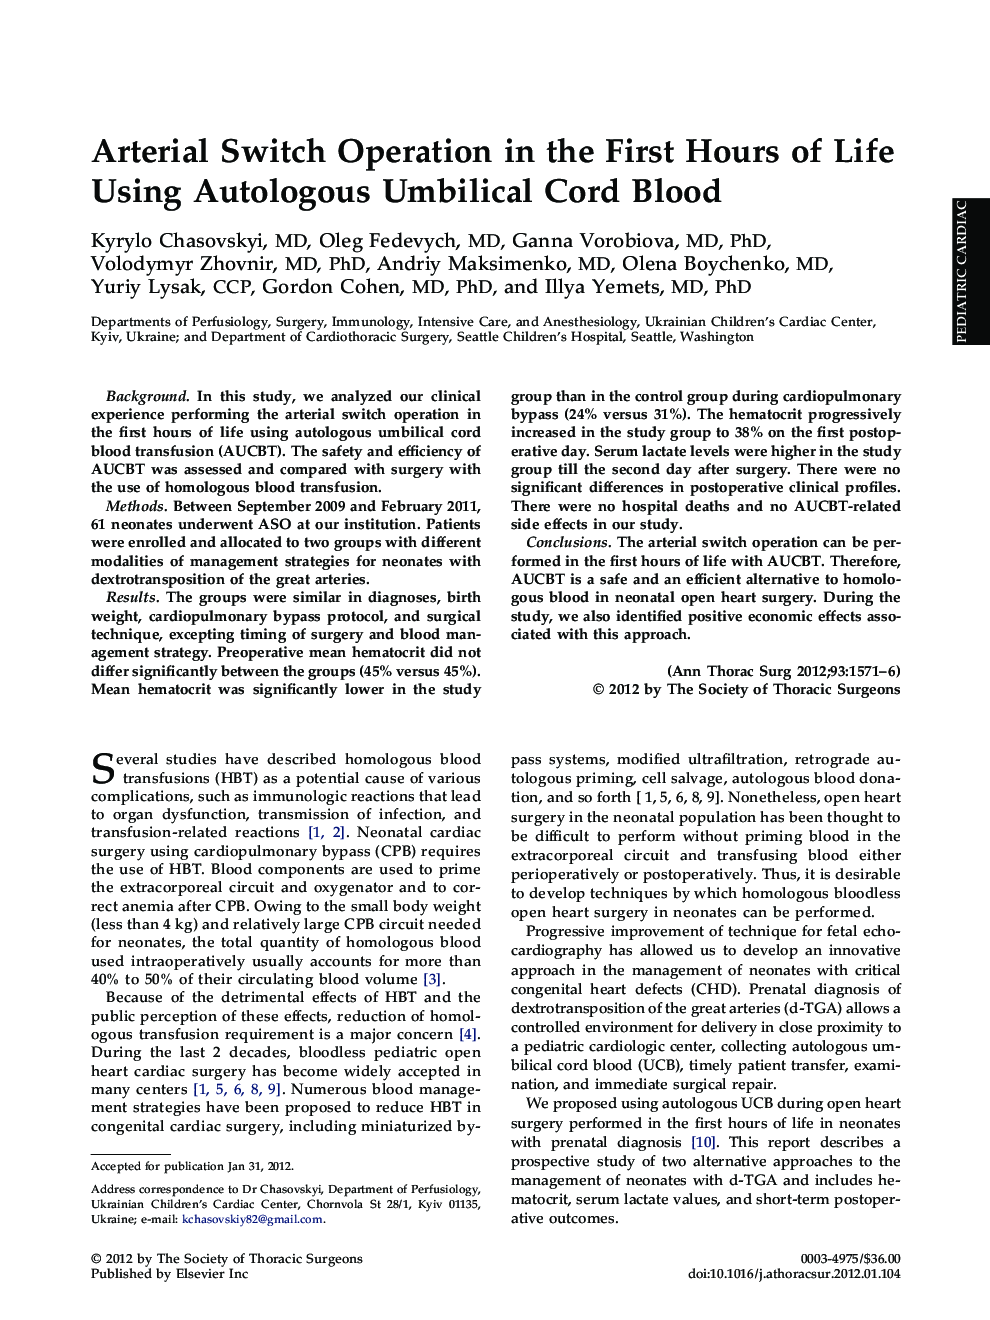 Arterial Switch Operation in the First Hours of Life Using Autologous Umbilical Cord Blood